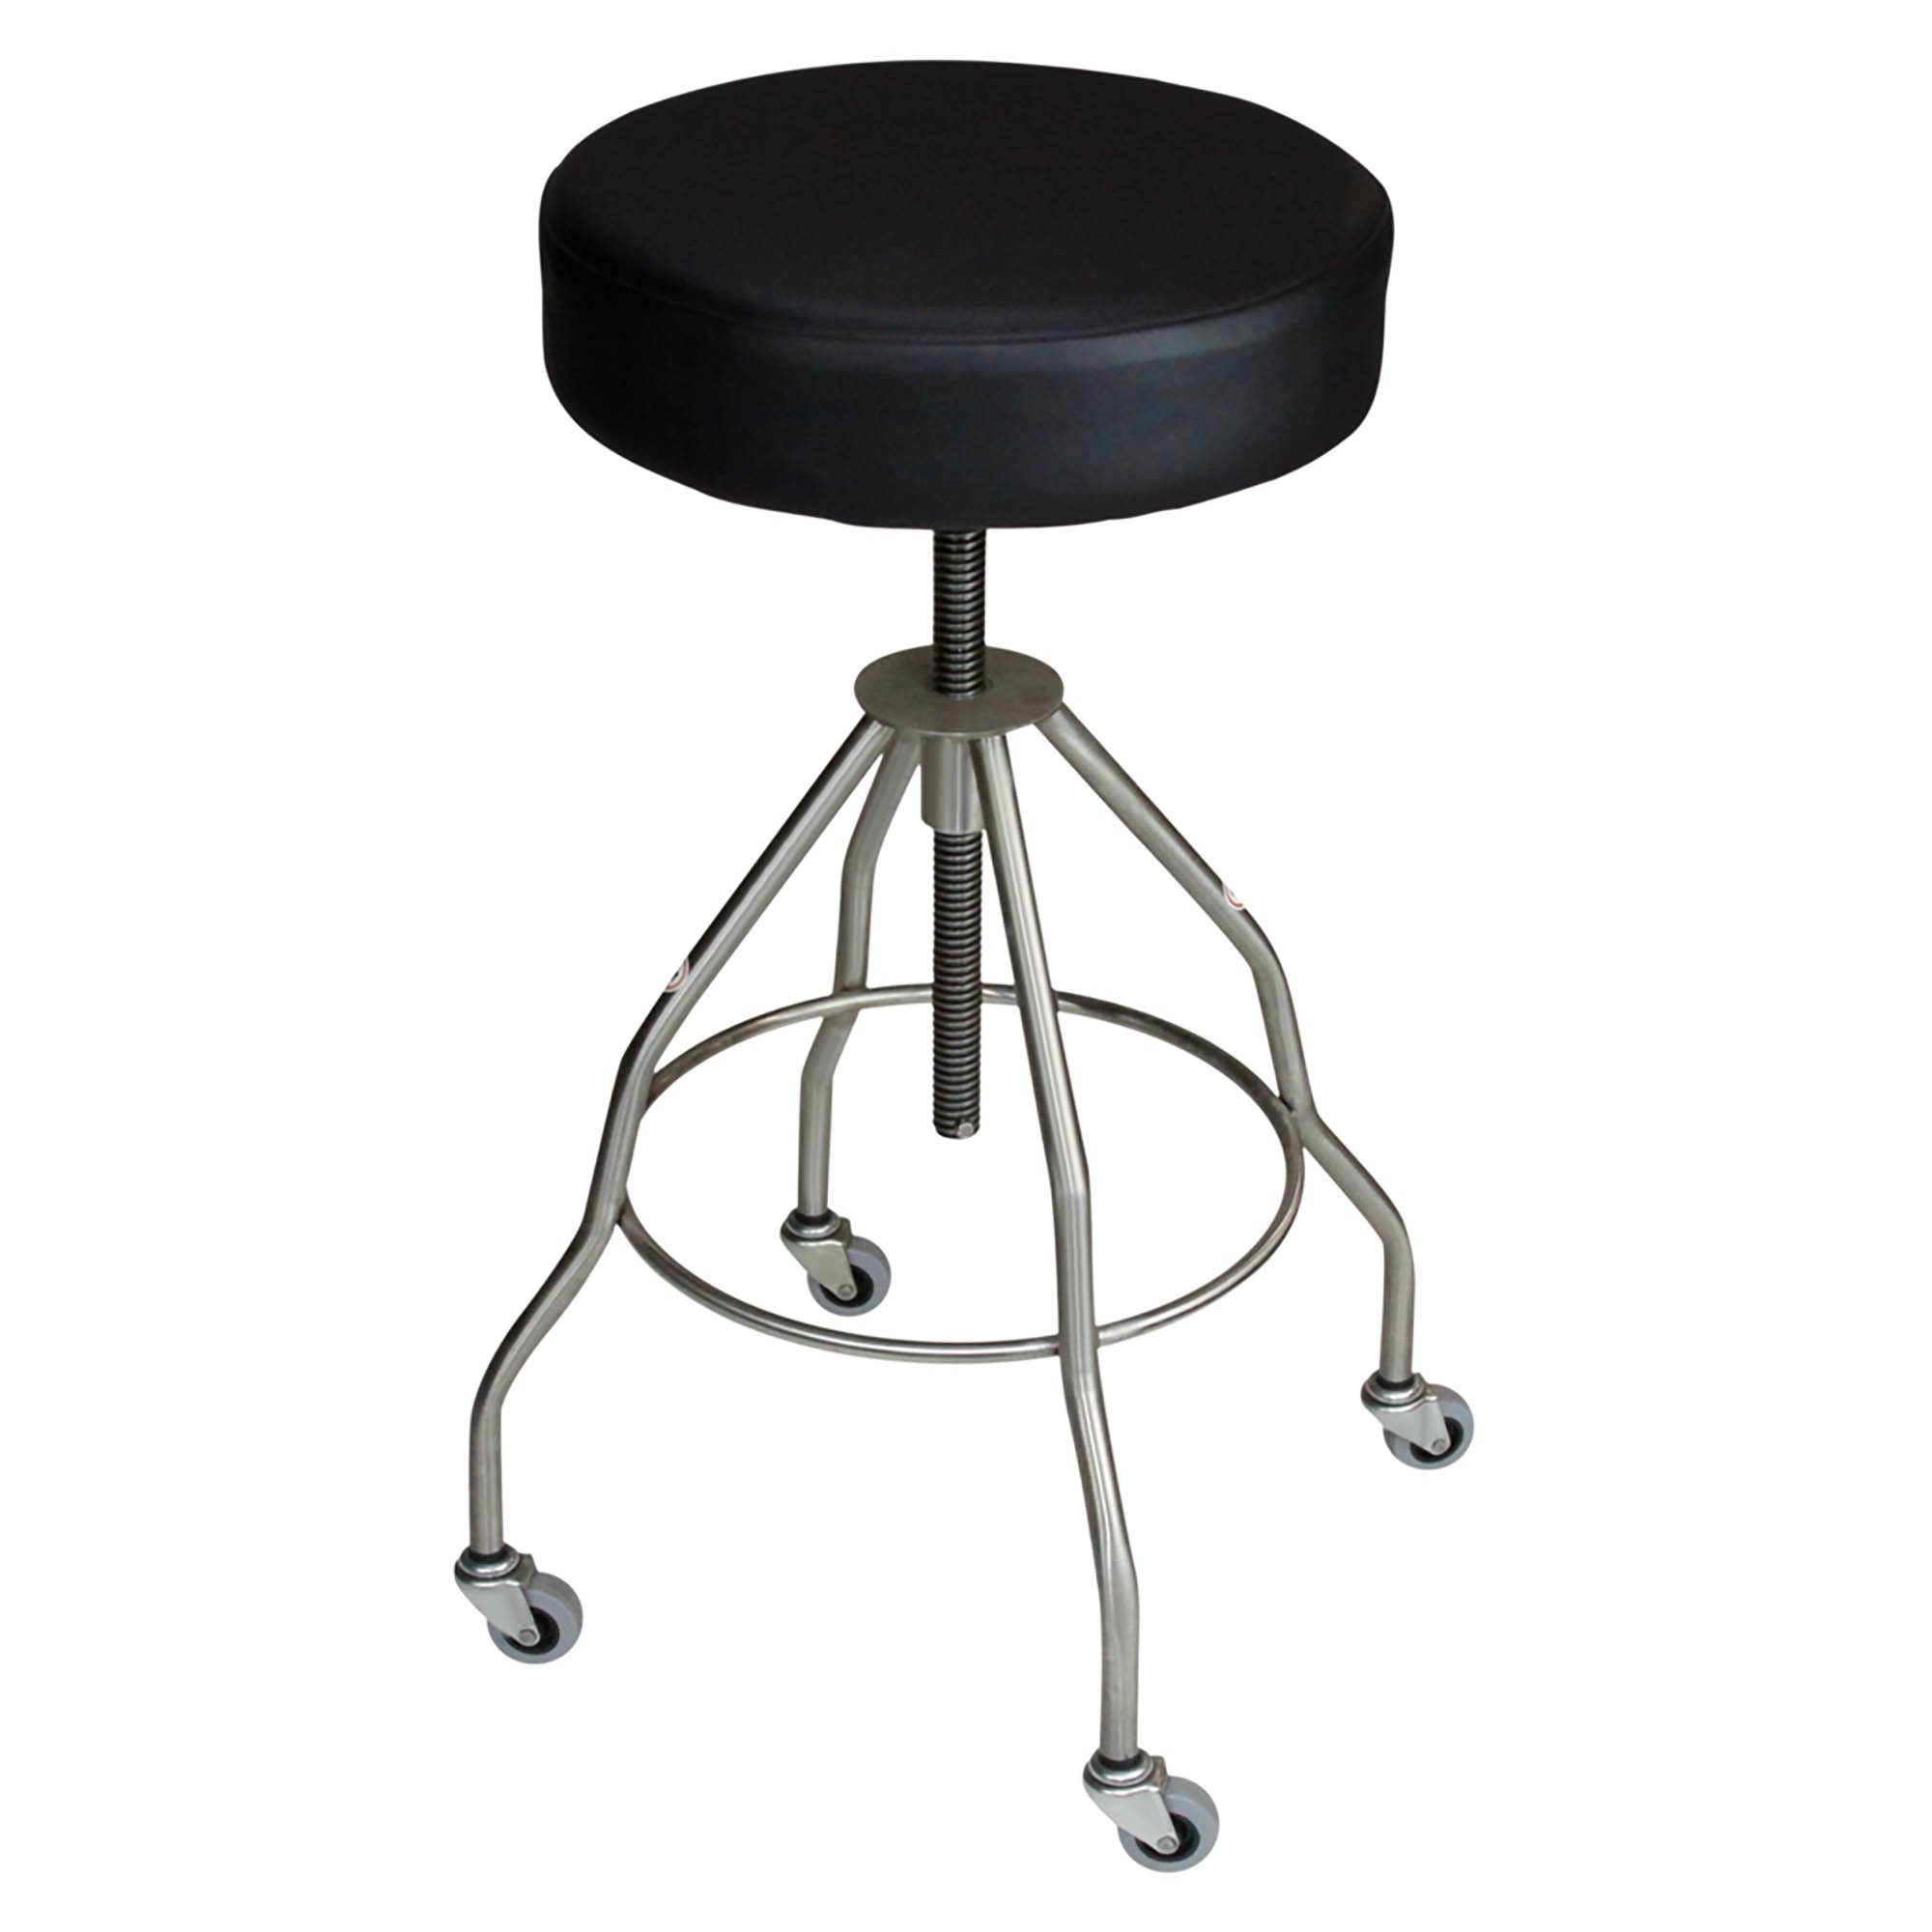 https://www.universalmedicalinc.com/media/catalog/product/cache/b4c565ddf1bc021465048acd78c313cc/7/7/7714-pssc_stainless-steel-passaic-stool-with-casters.jpg